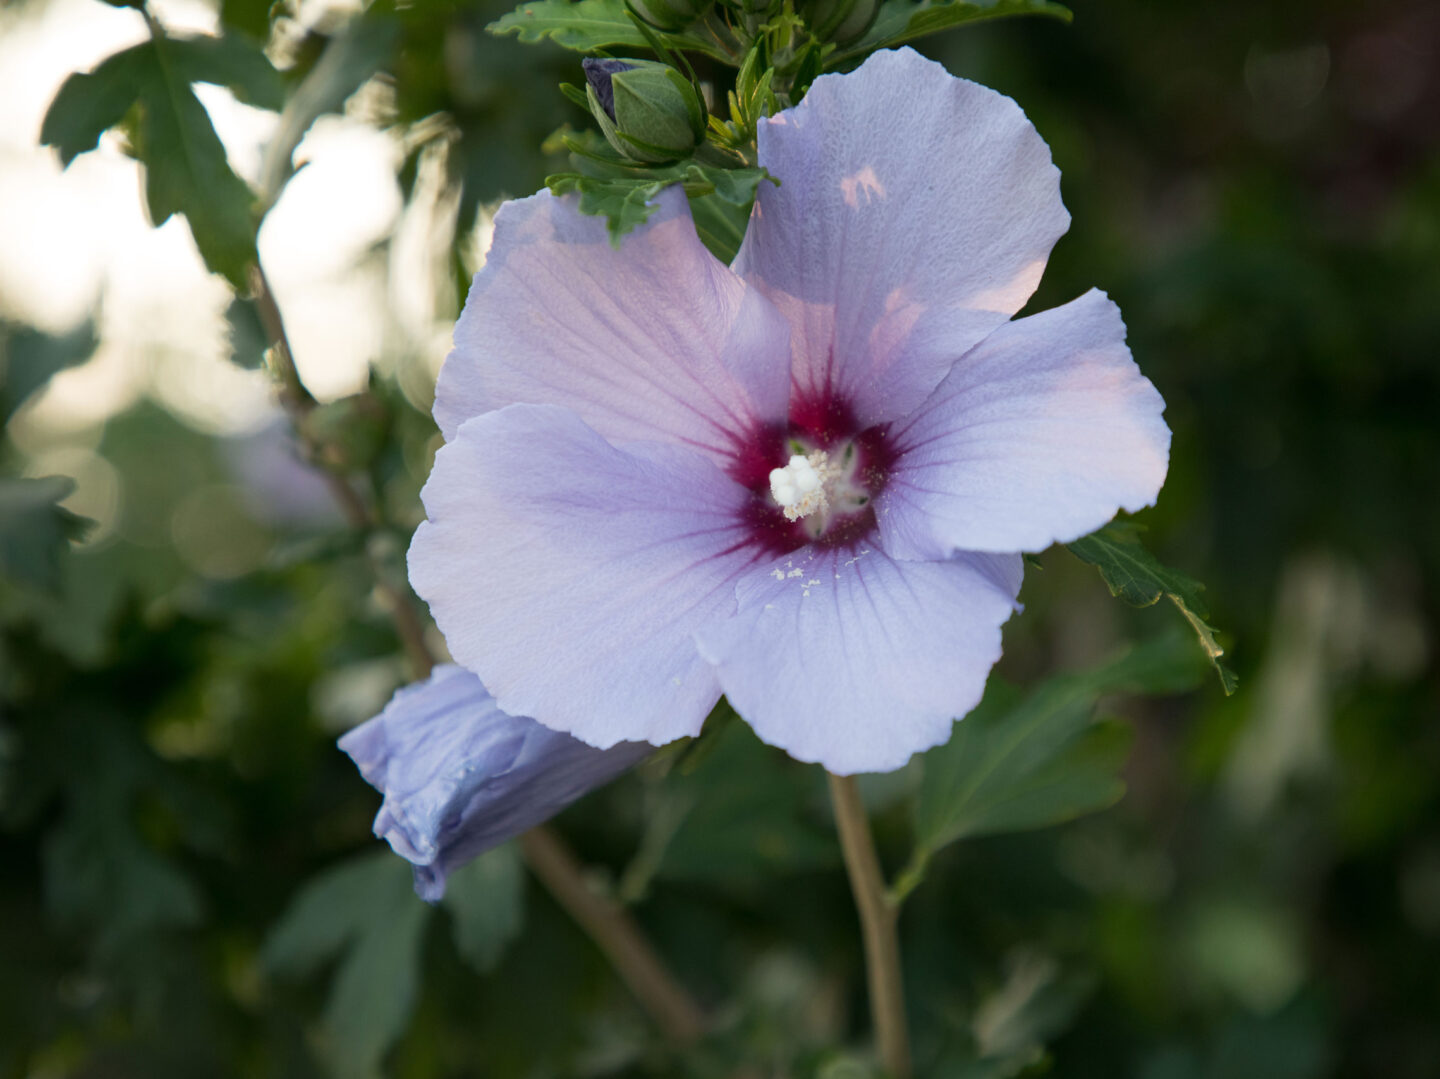 Rose of Sharon blooming at HRPKs Entry Garden and Community Garden